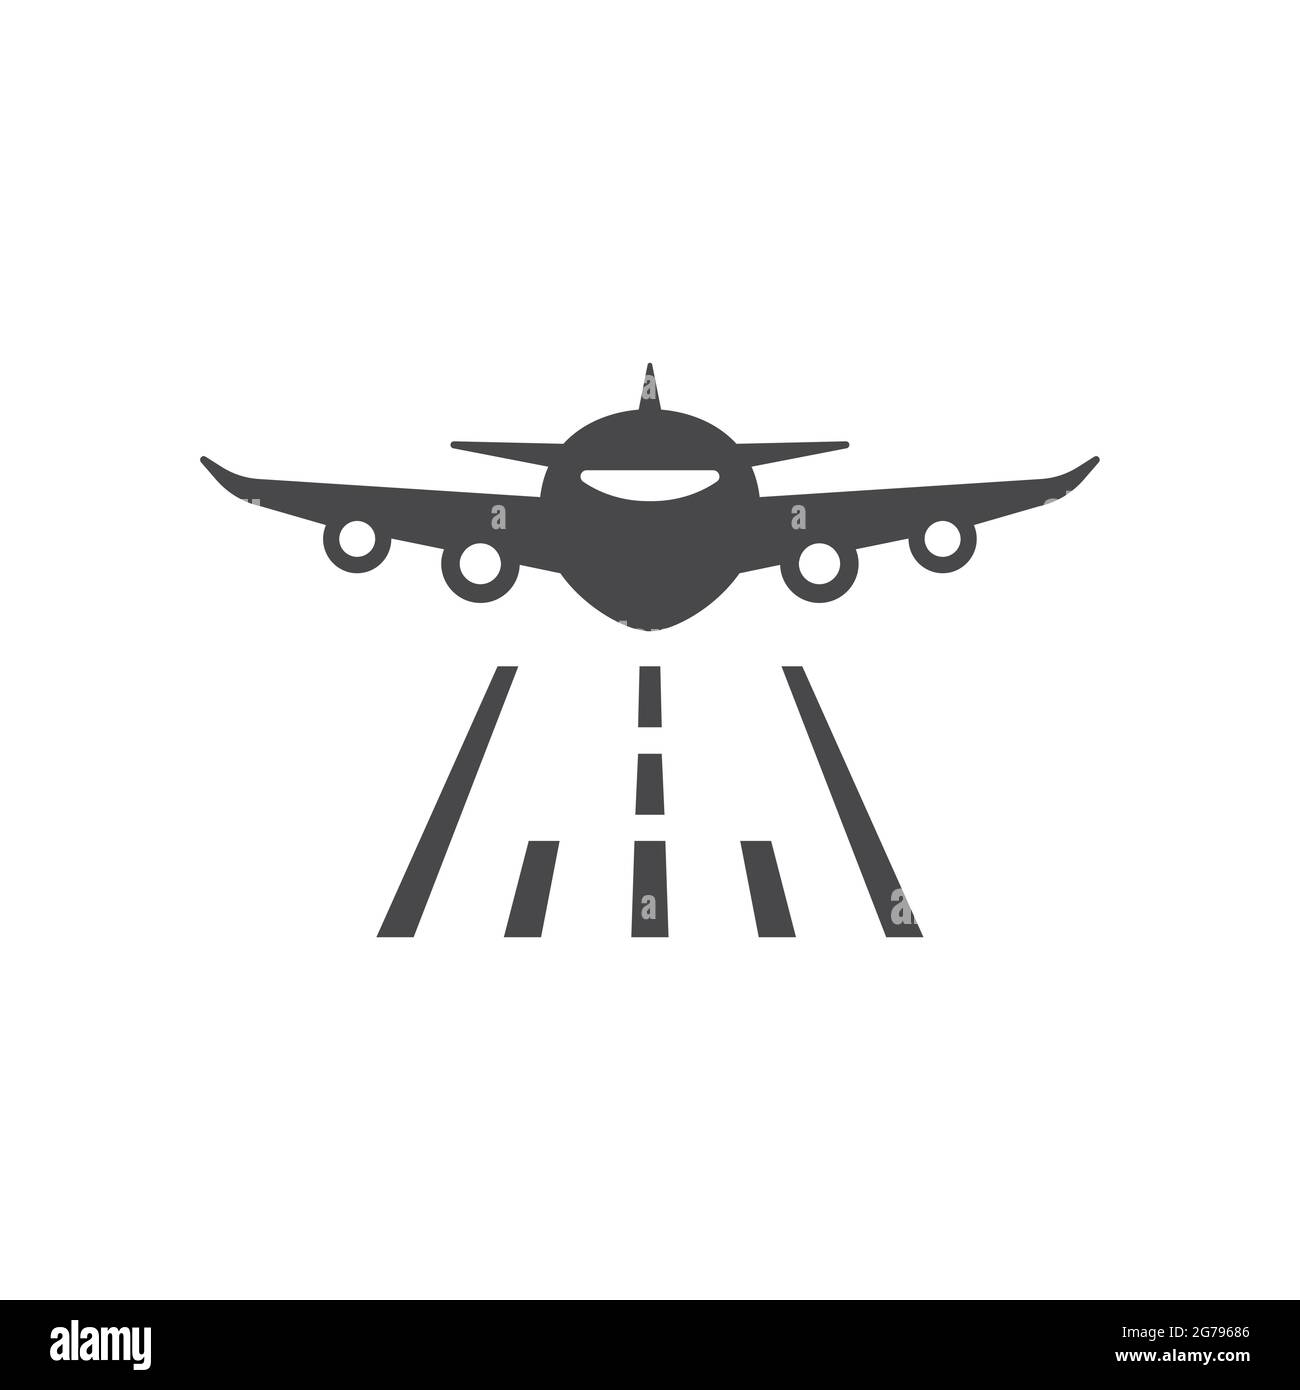 Airplane and runway black vector icon. Plane front, commercial flying symbol. Stock Vector